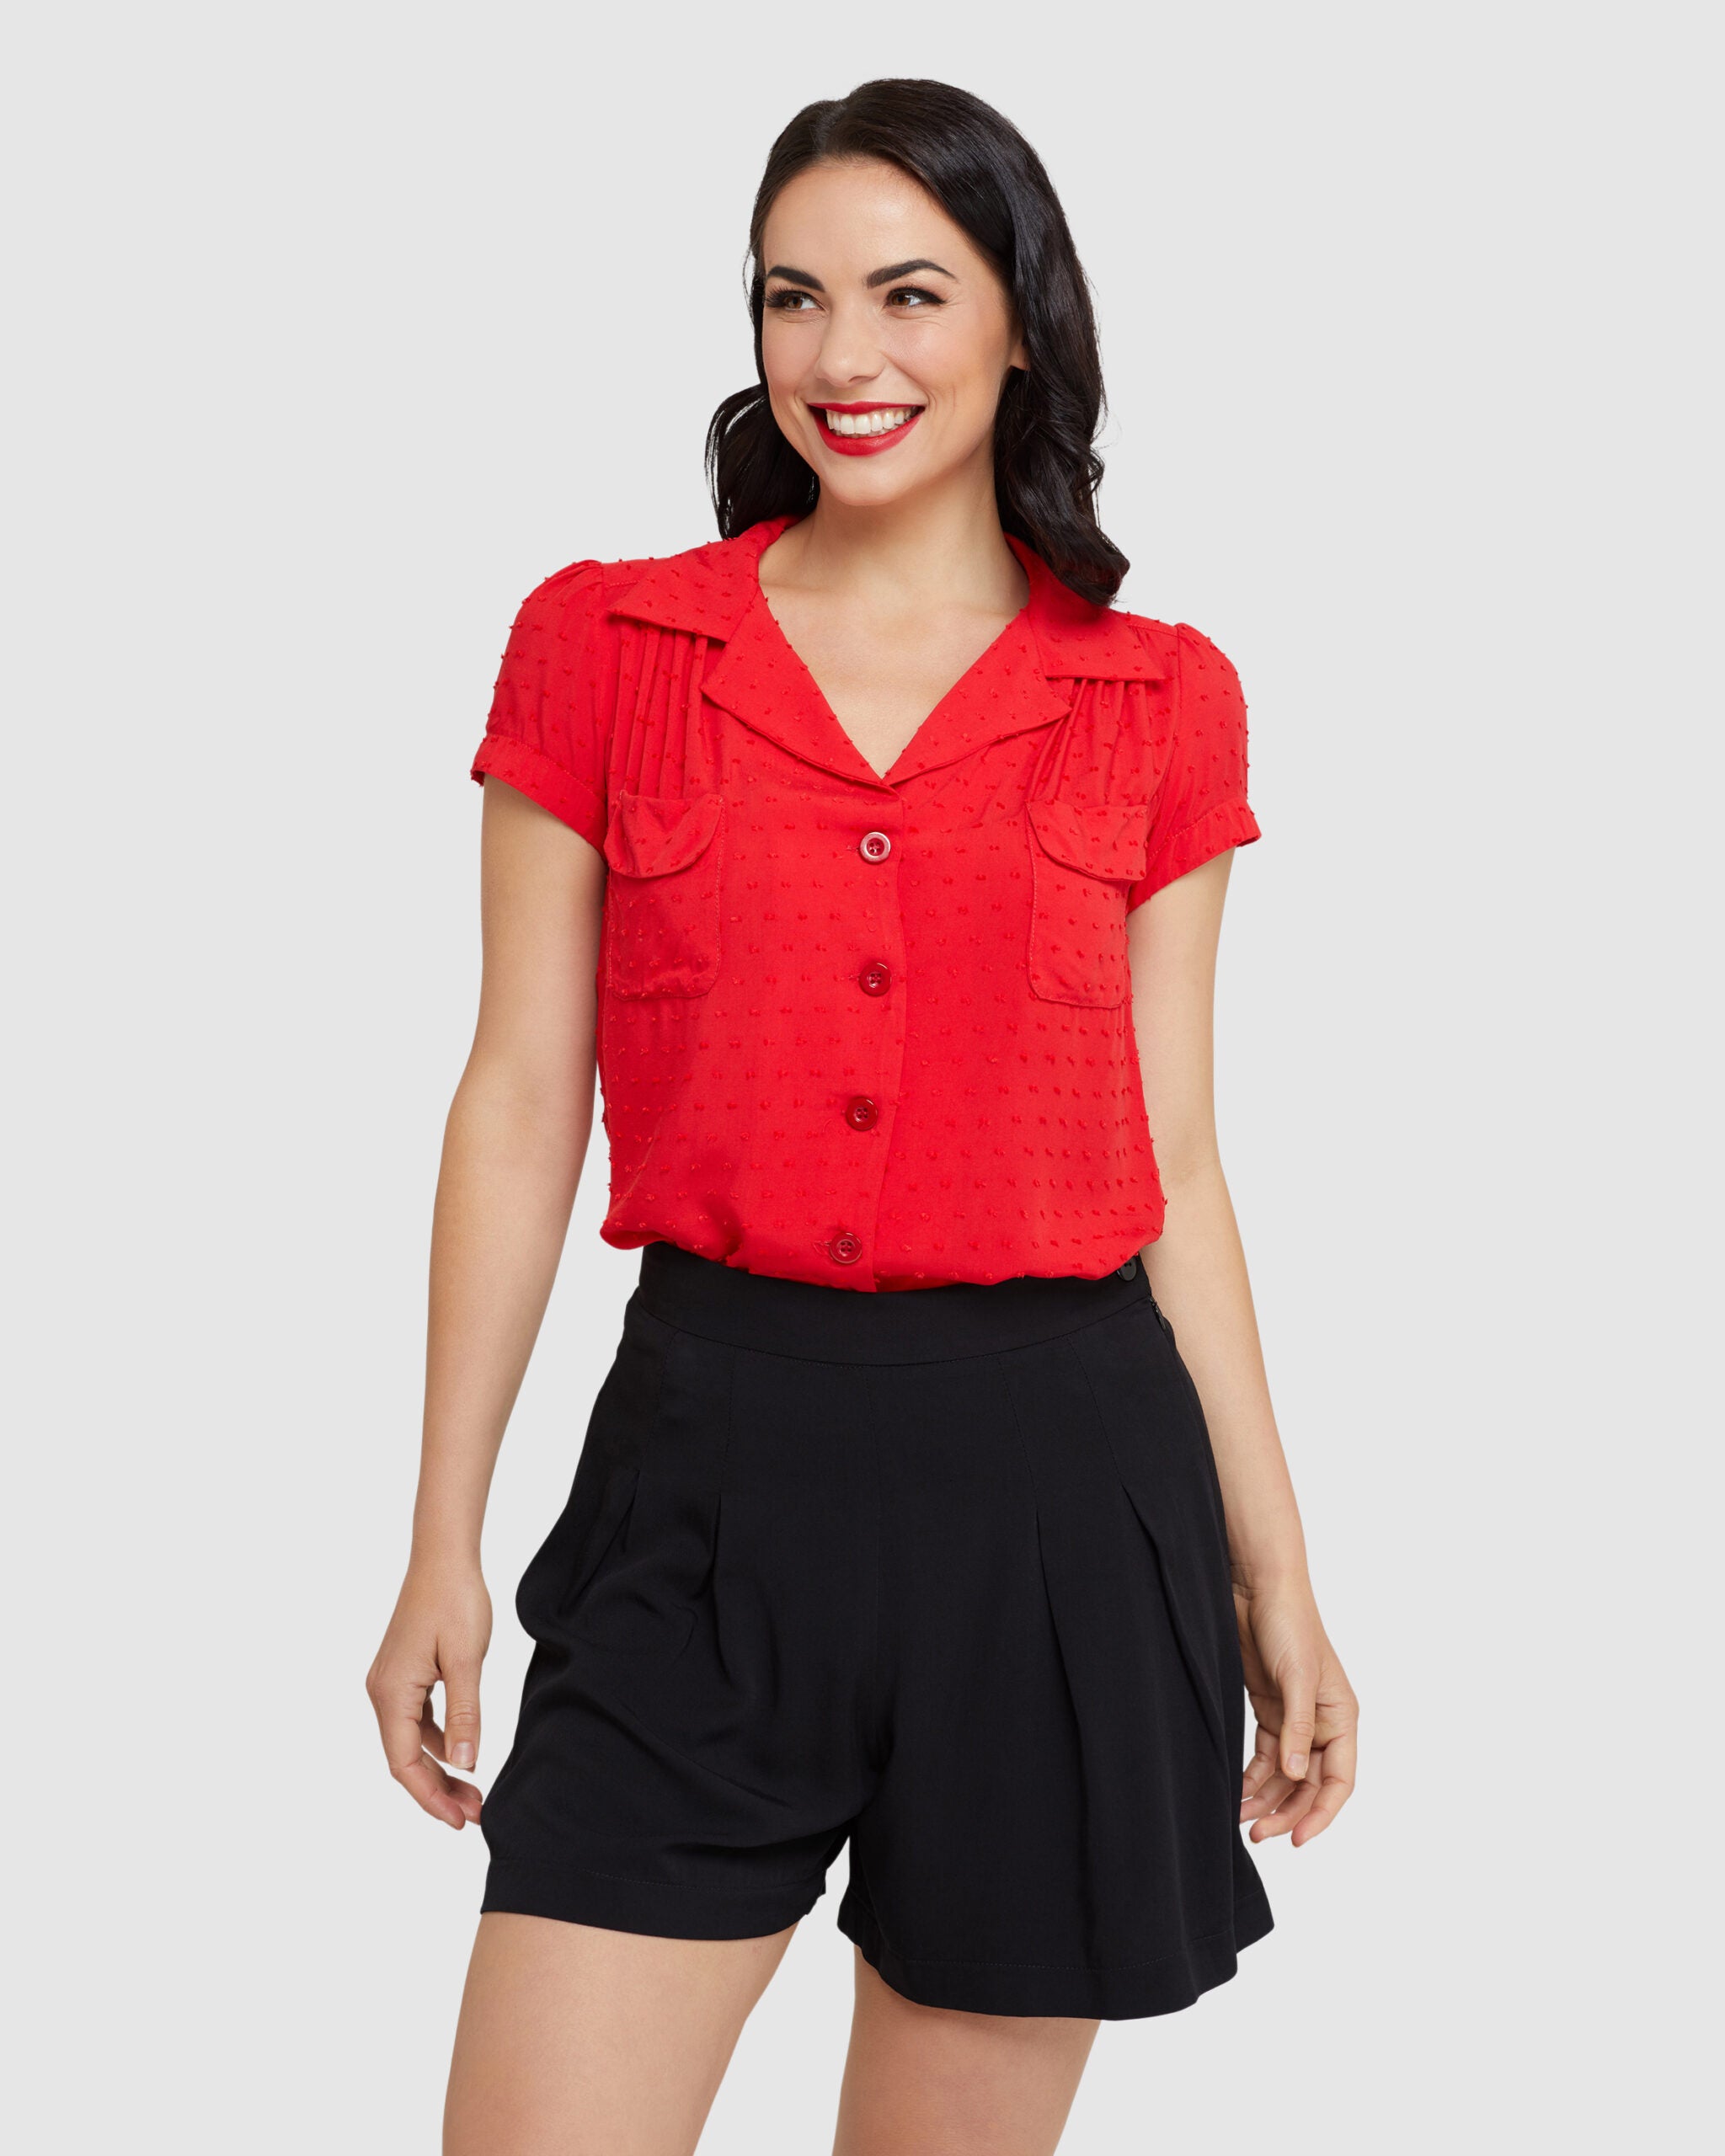 Evita Blouse Red Textured Rayon